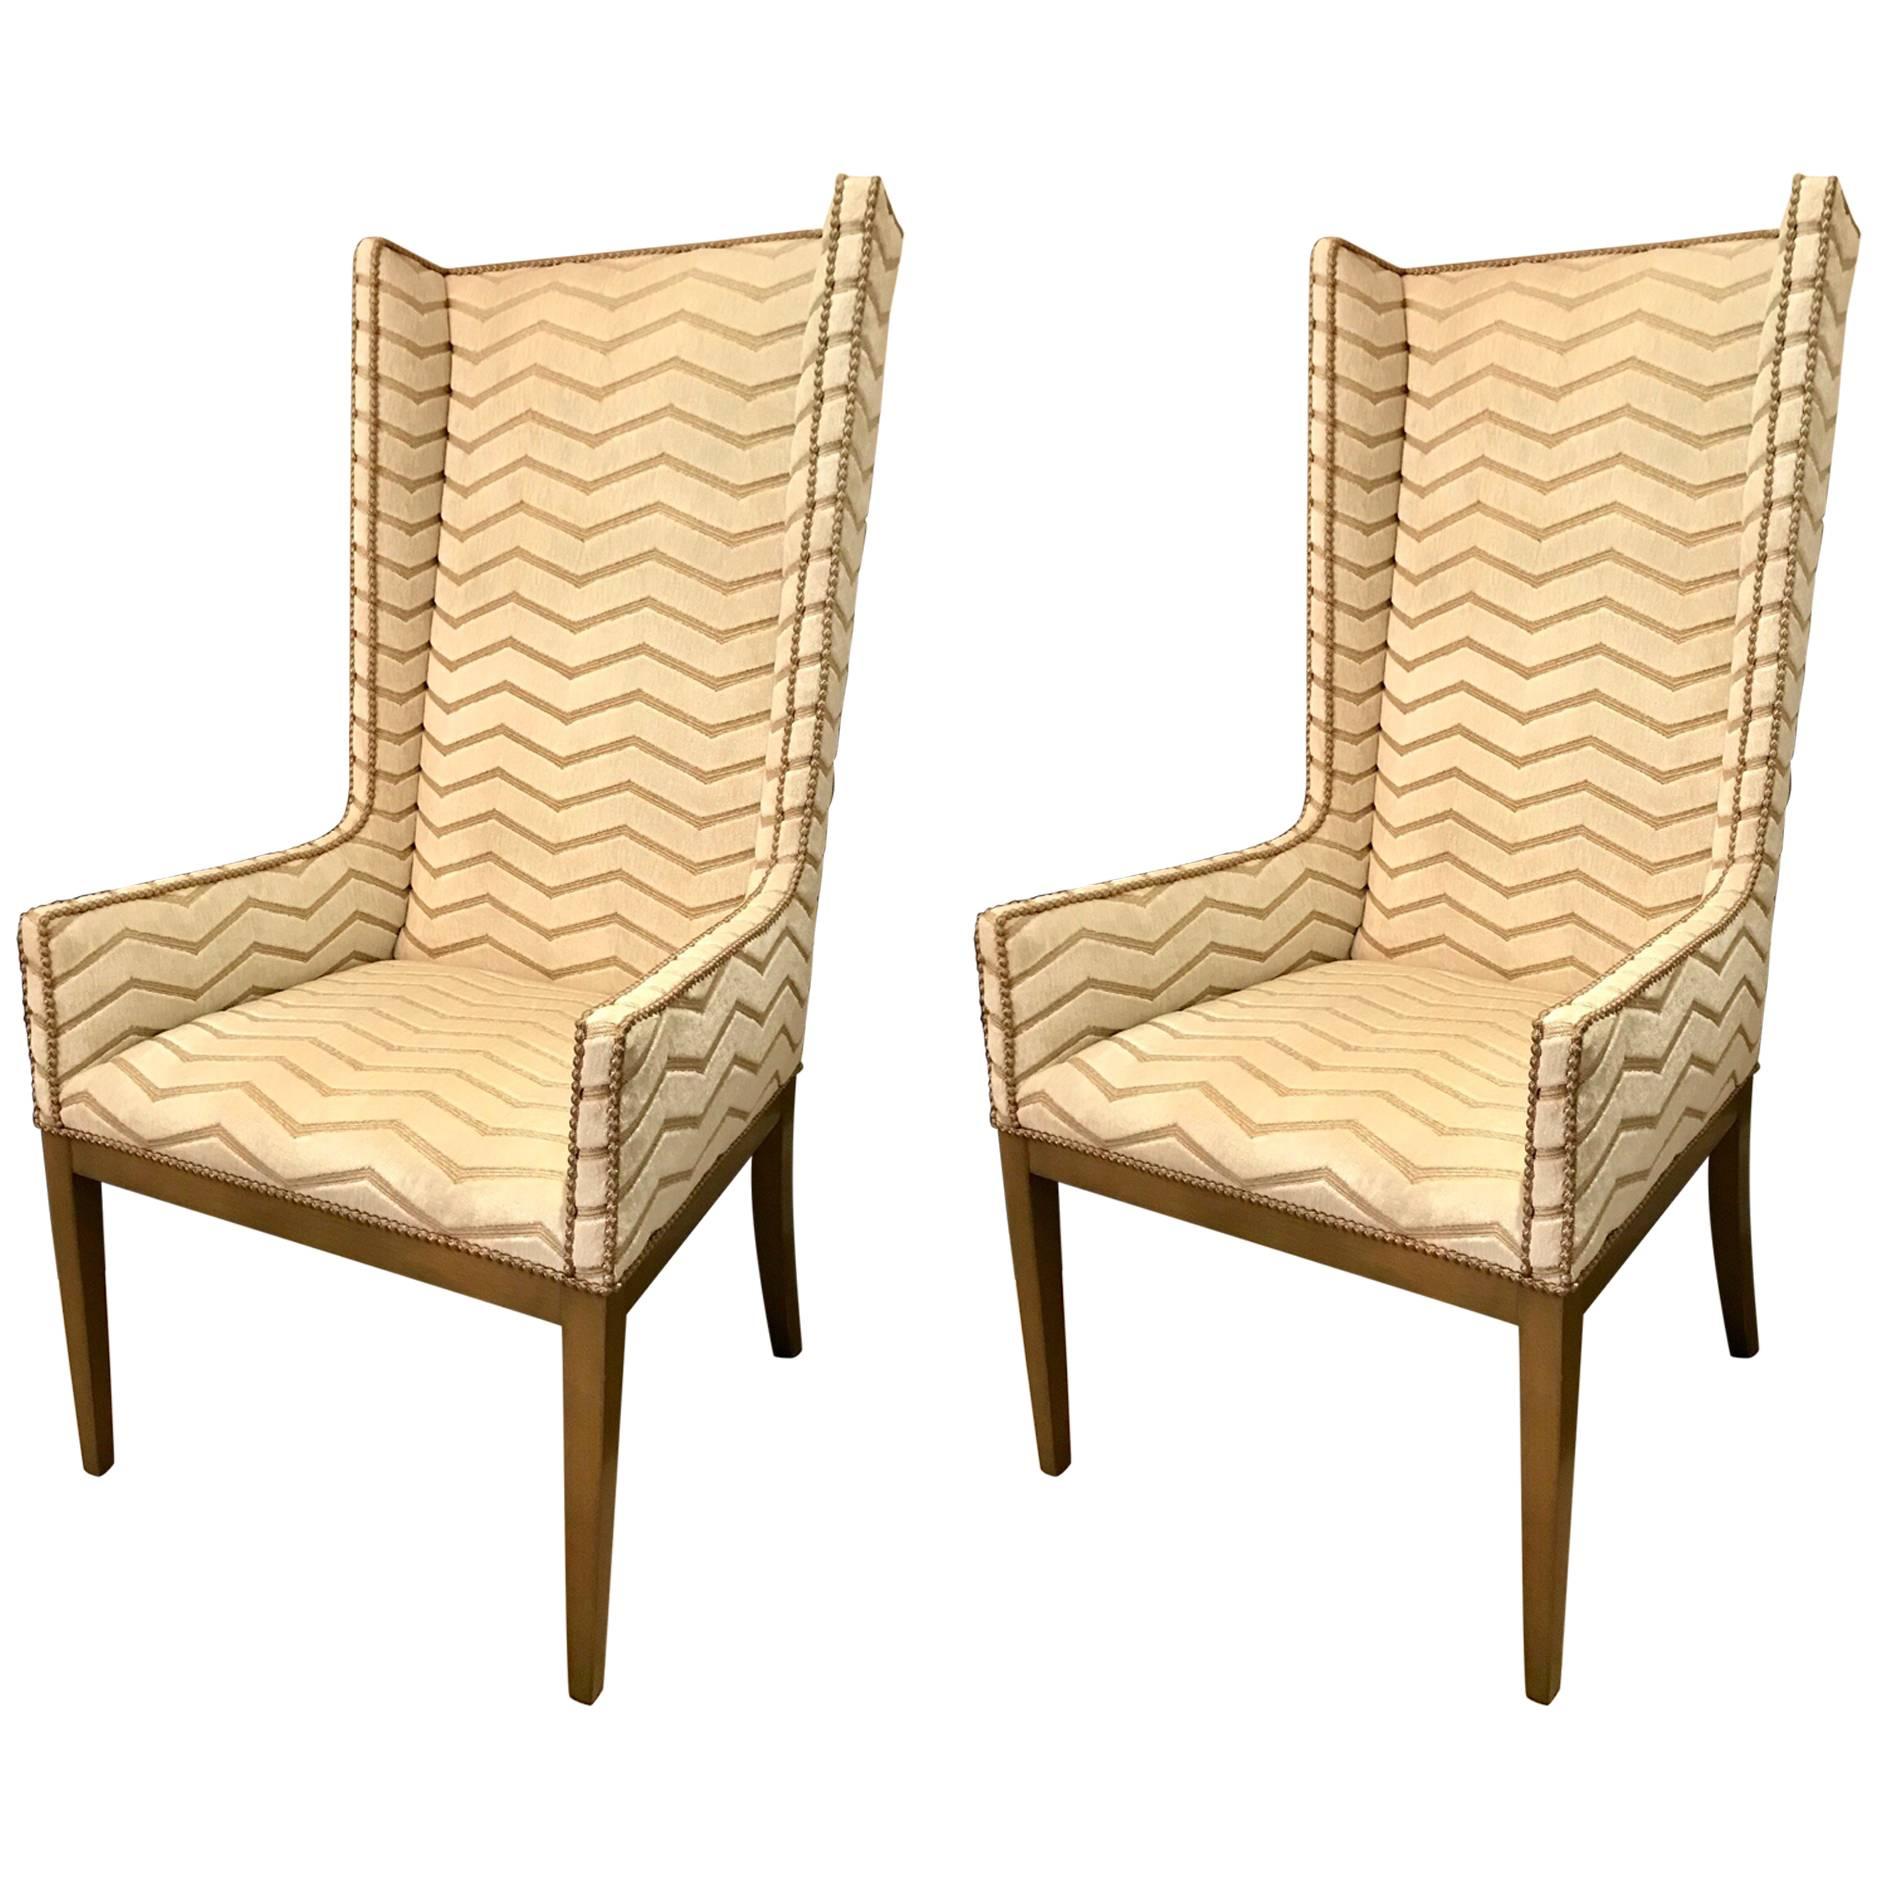 Pair of Armchairs by Artistic Frames